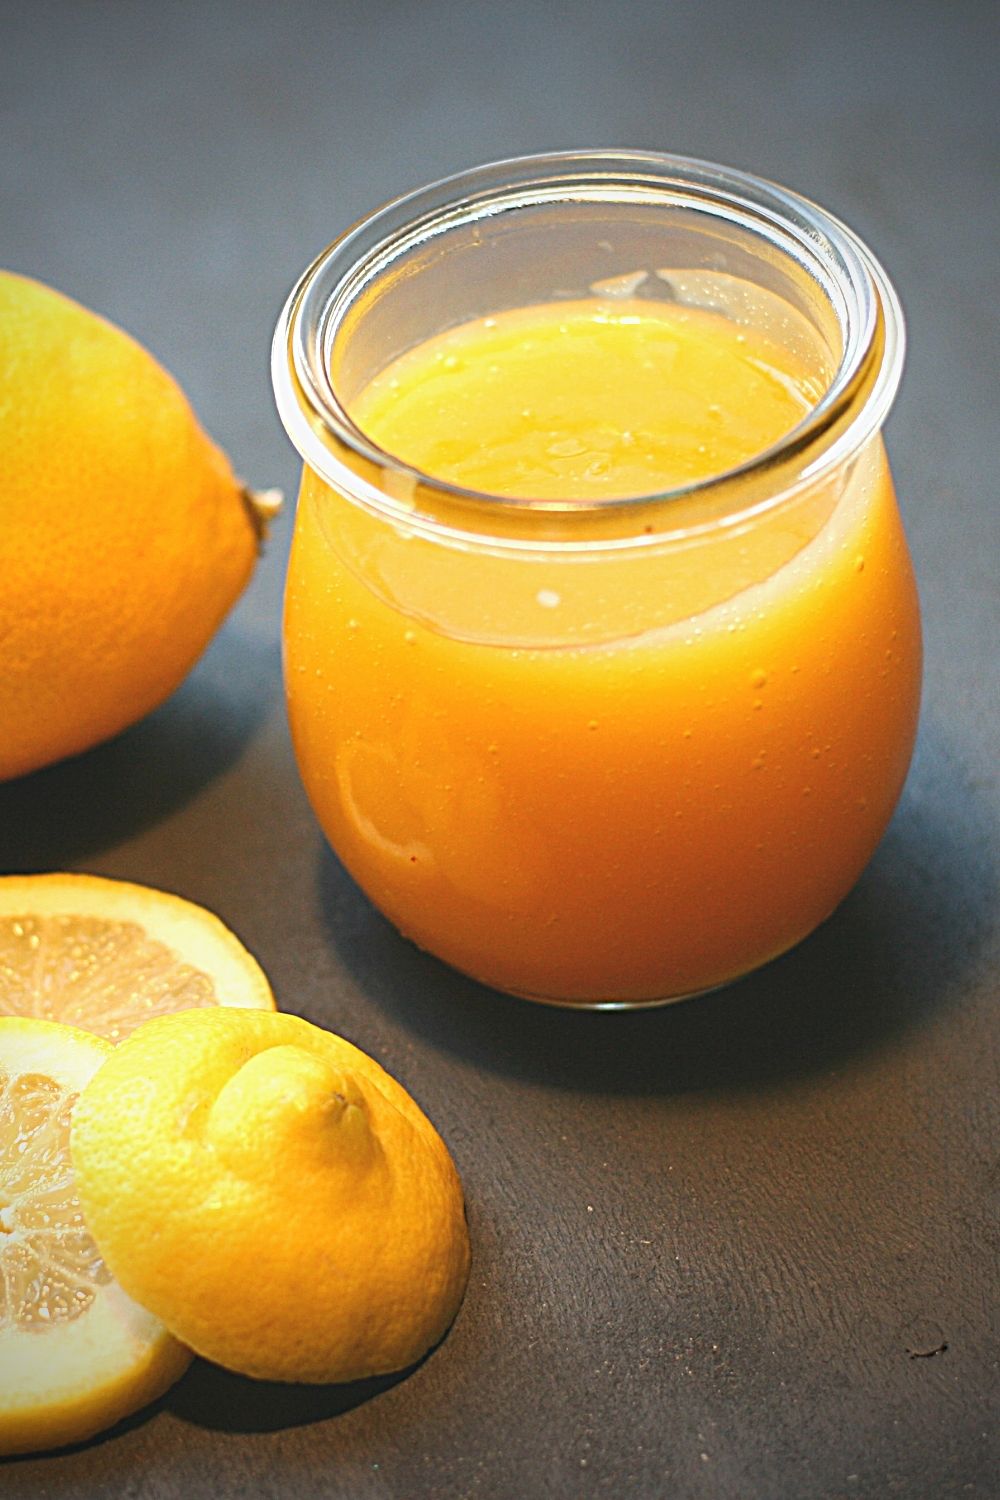 A foolproof lemon curd recipe (+ 3 other delicious fruit curd recipes)